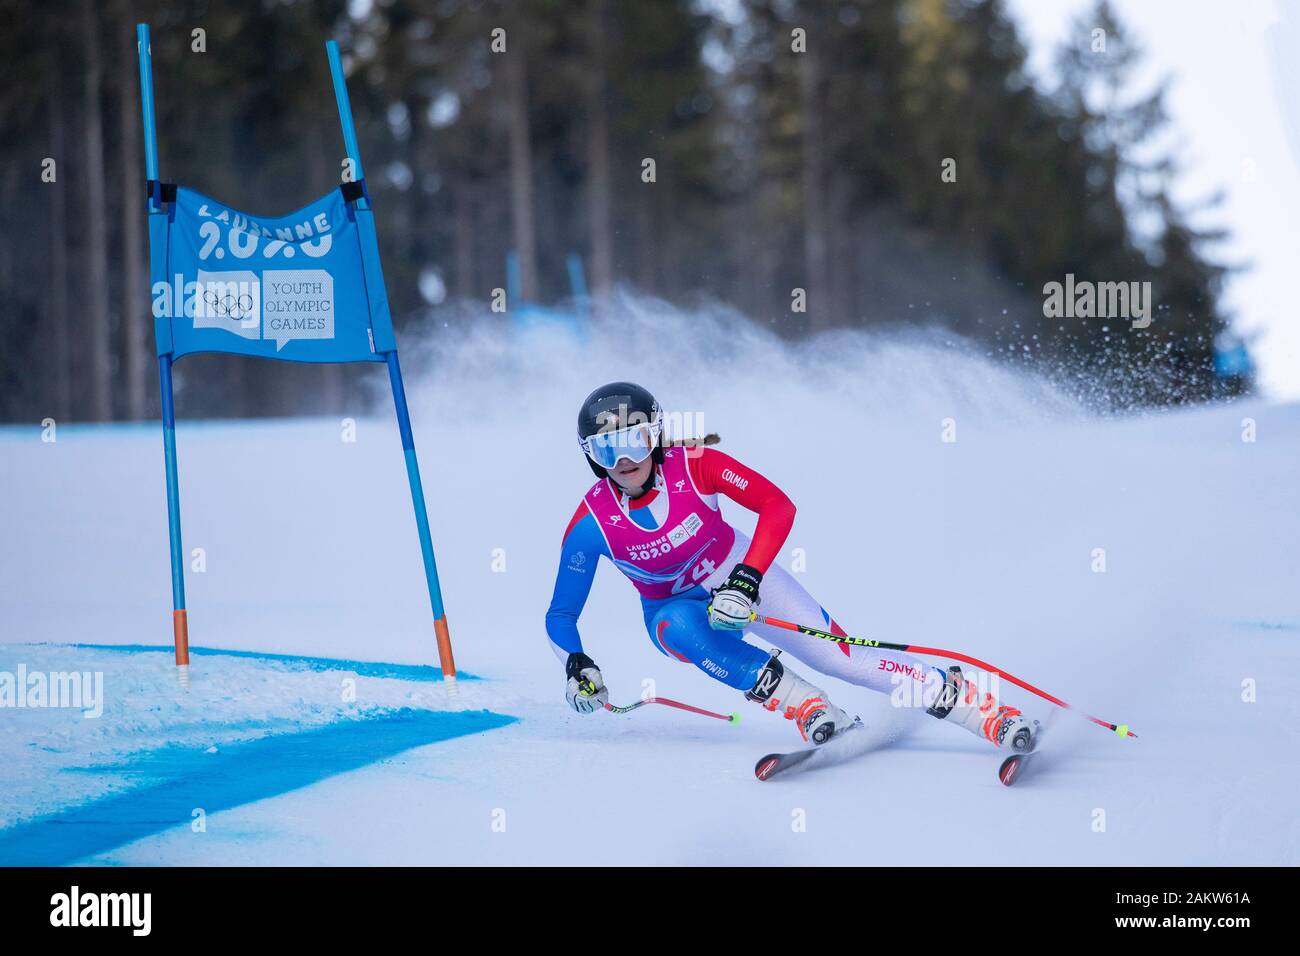 Alpine skier, Chiara Pogneaux, FRA, competes in the Lausanne 2020 Women's Super G Downhill Skiing At Les Diablerets Alpine Centre In Switzerland Stock Photo